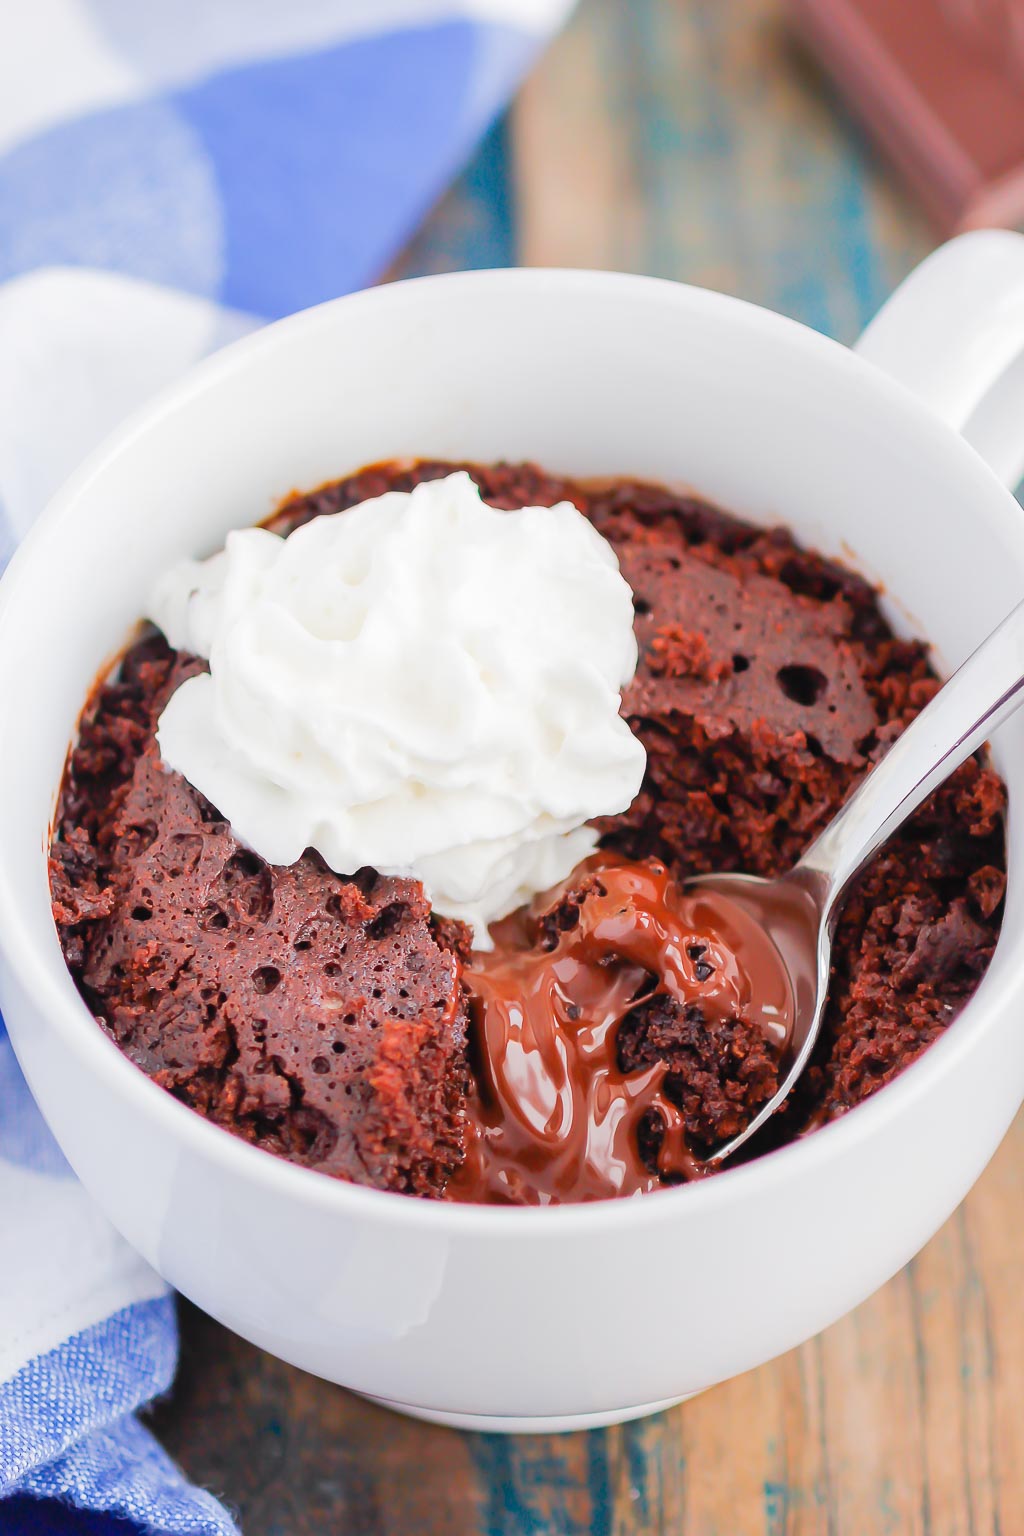 Chocolate Lava Mug Cake is moist and fudgy, with a warm molten center. Made in the microwave and ready in minutes, this easy treat is perfect for chocolate lovers! #mugcake #chocolatemugcake #chocolatelavamugcake #lavacake #lavamugcake #bestmugcake #dessert